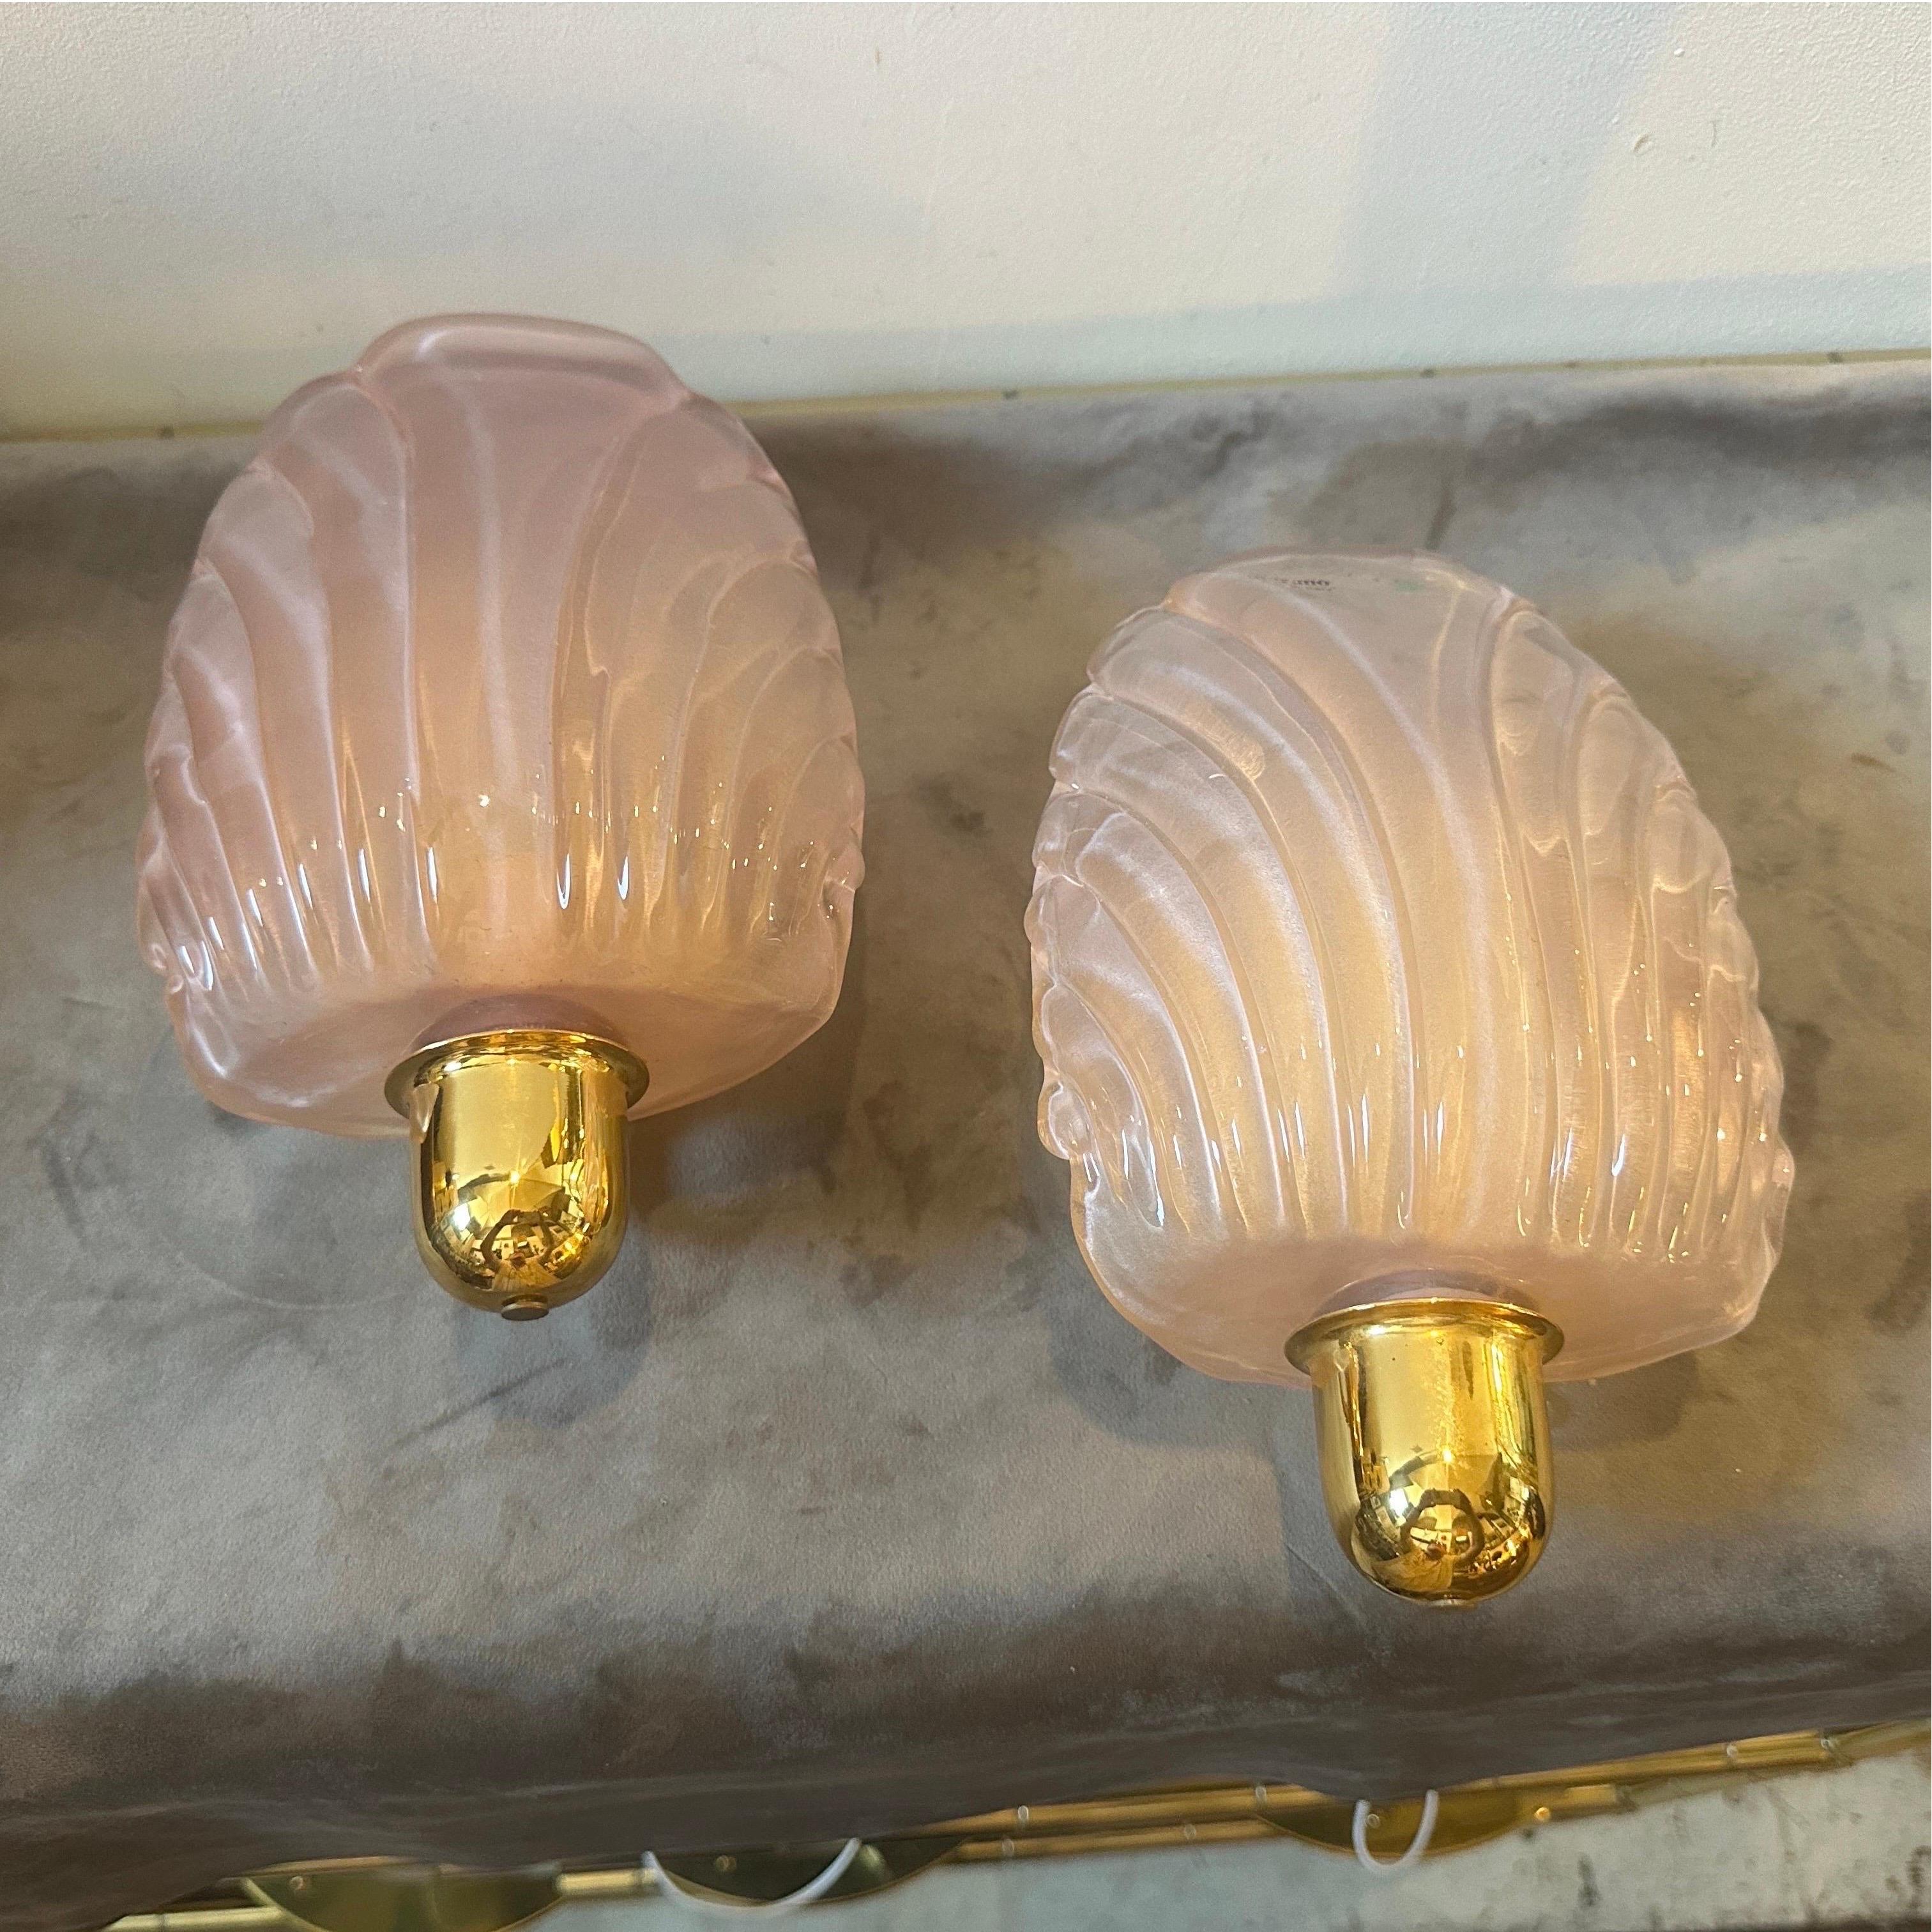 A pair of pink murano glass wall sconces designed and manufactured in Italy in the Eighties, they are in working order and in perfect conditions. These Murano Glass Wall Sconces are a delightful blend of mid-century modern simplicity and the